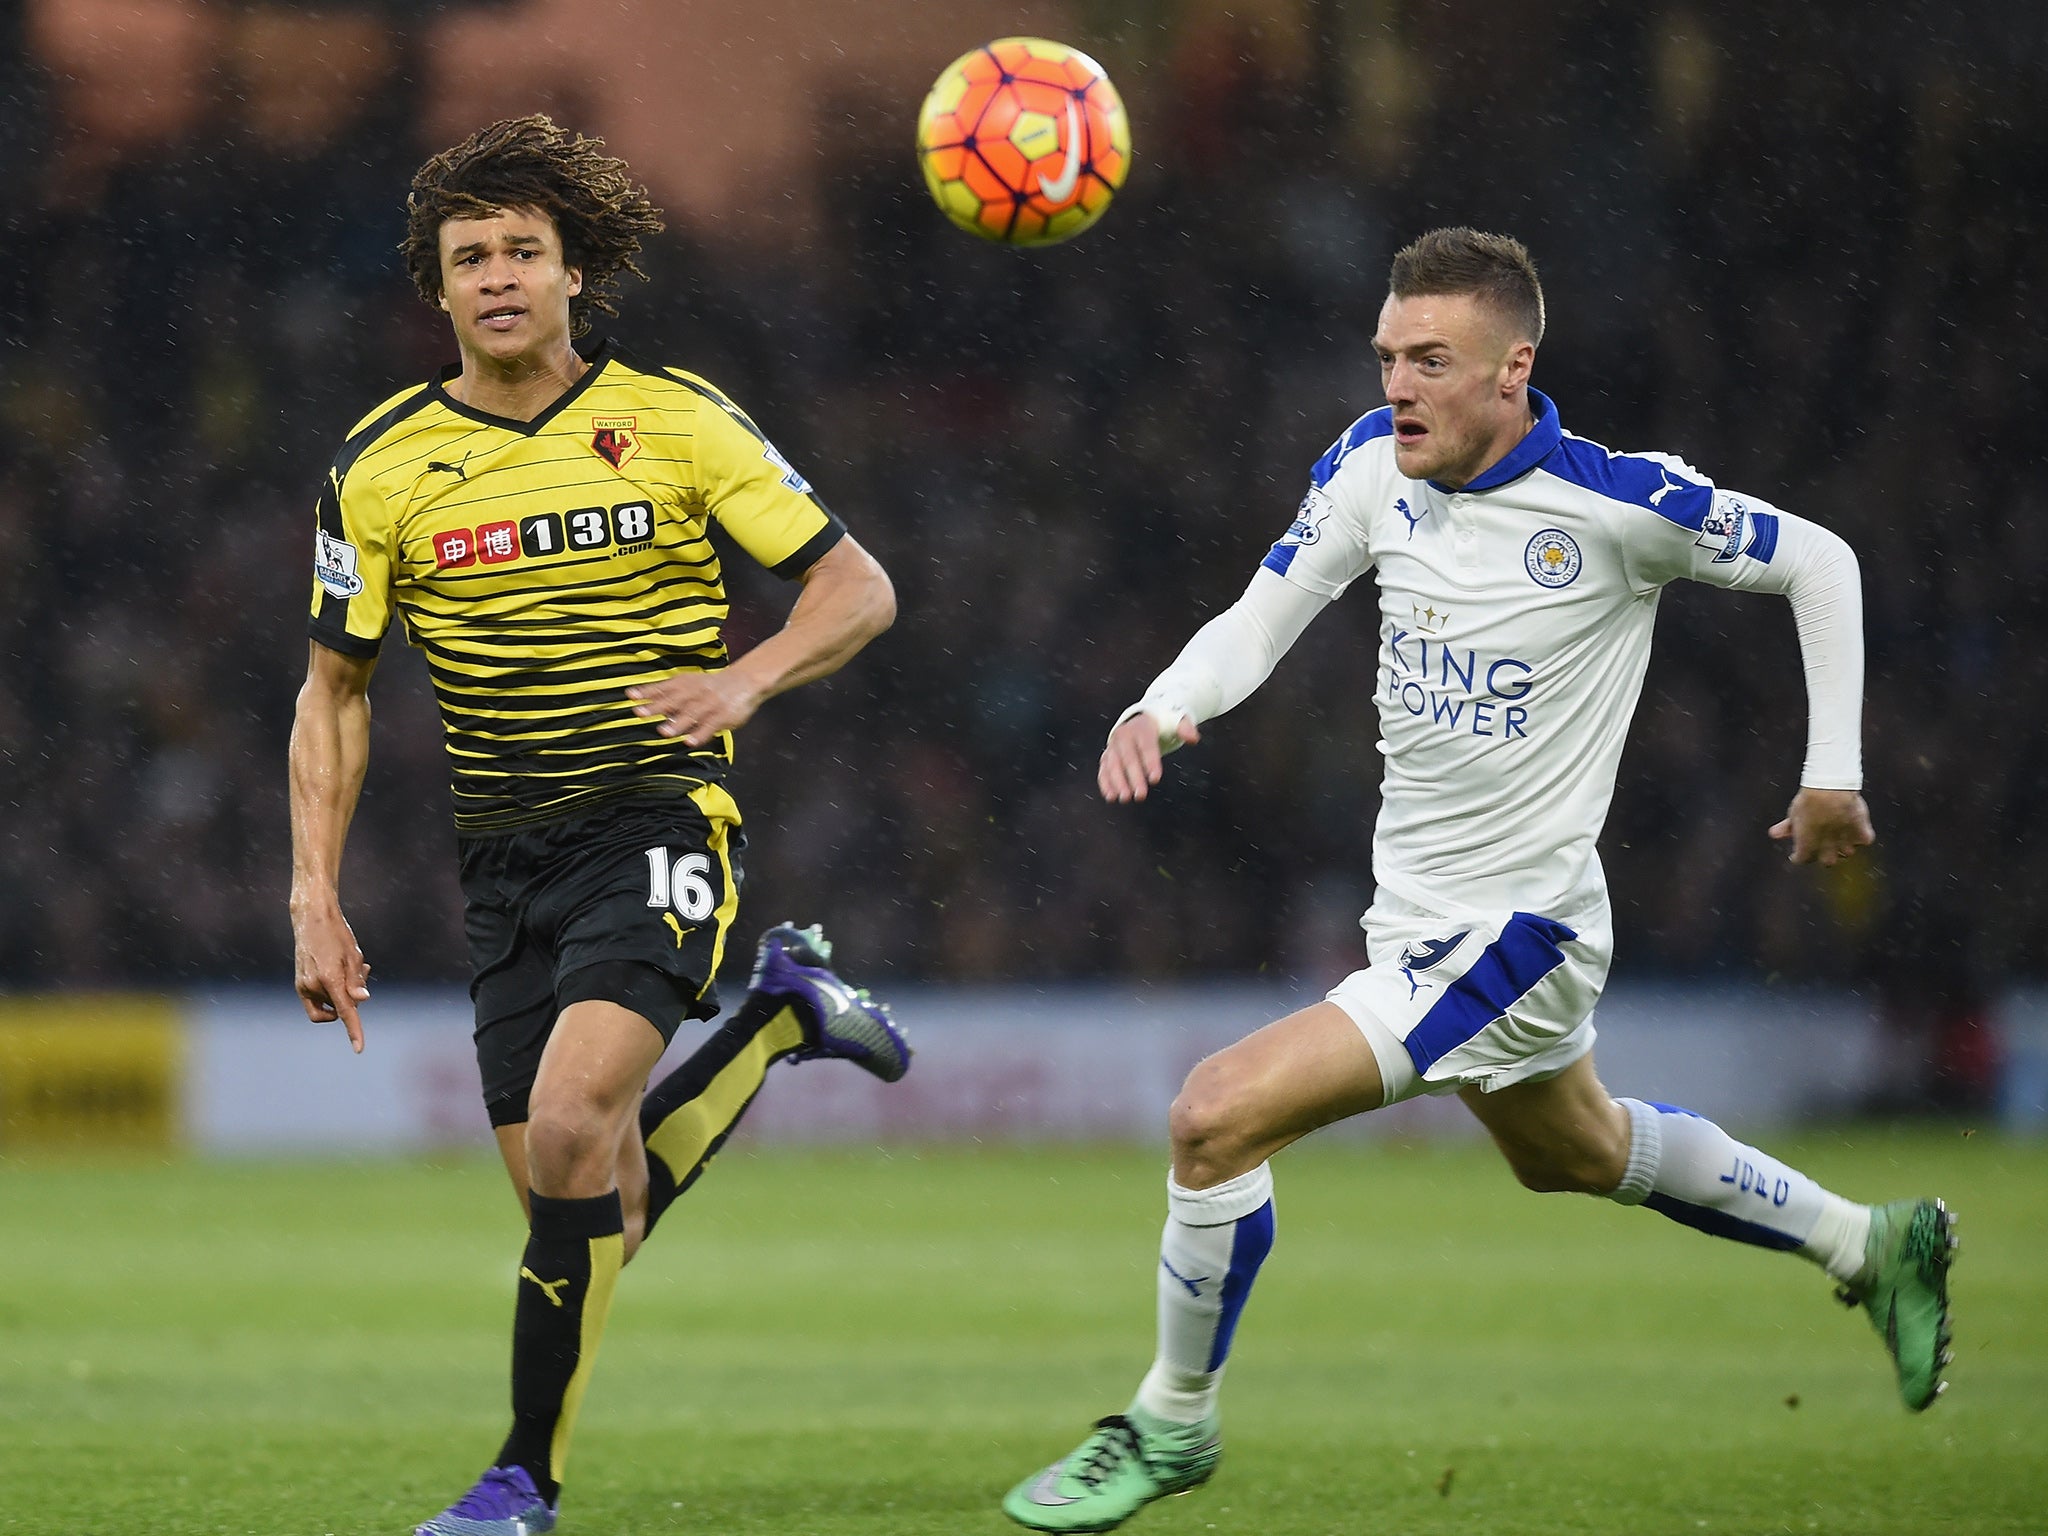 Watford's Nathan Ake and Leicester's Jamie Vardy vie for the ball